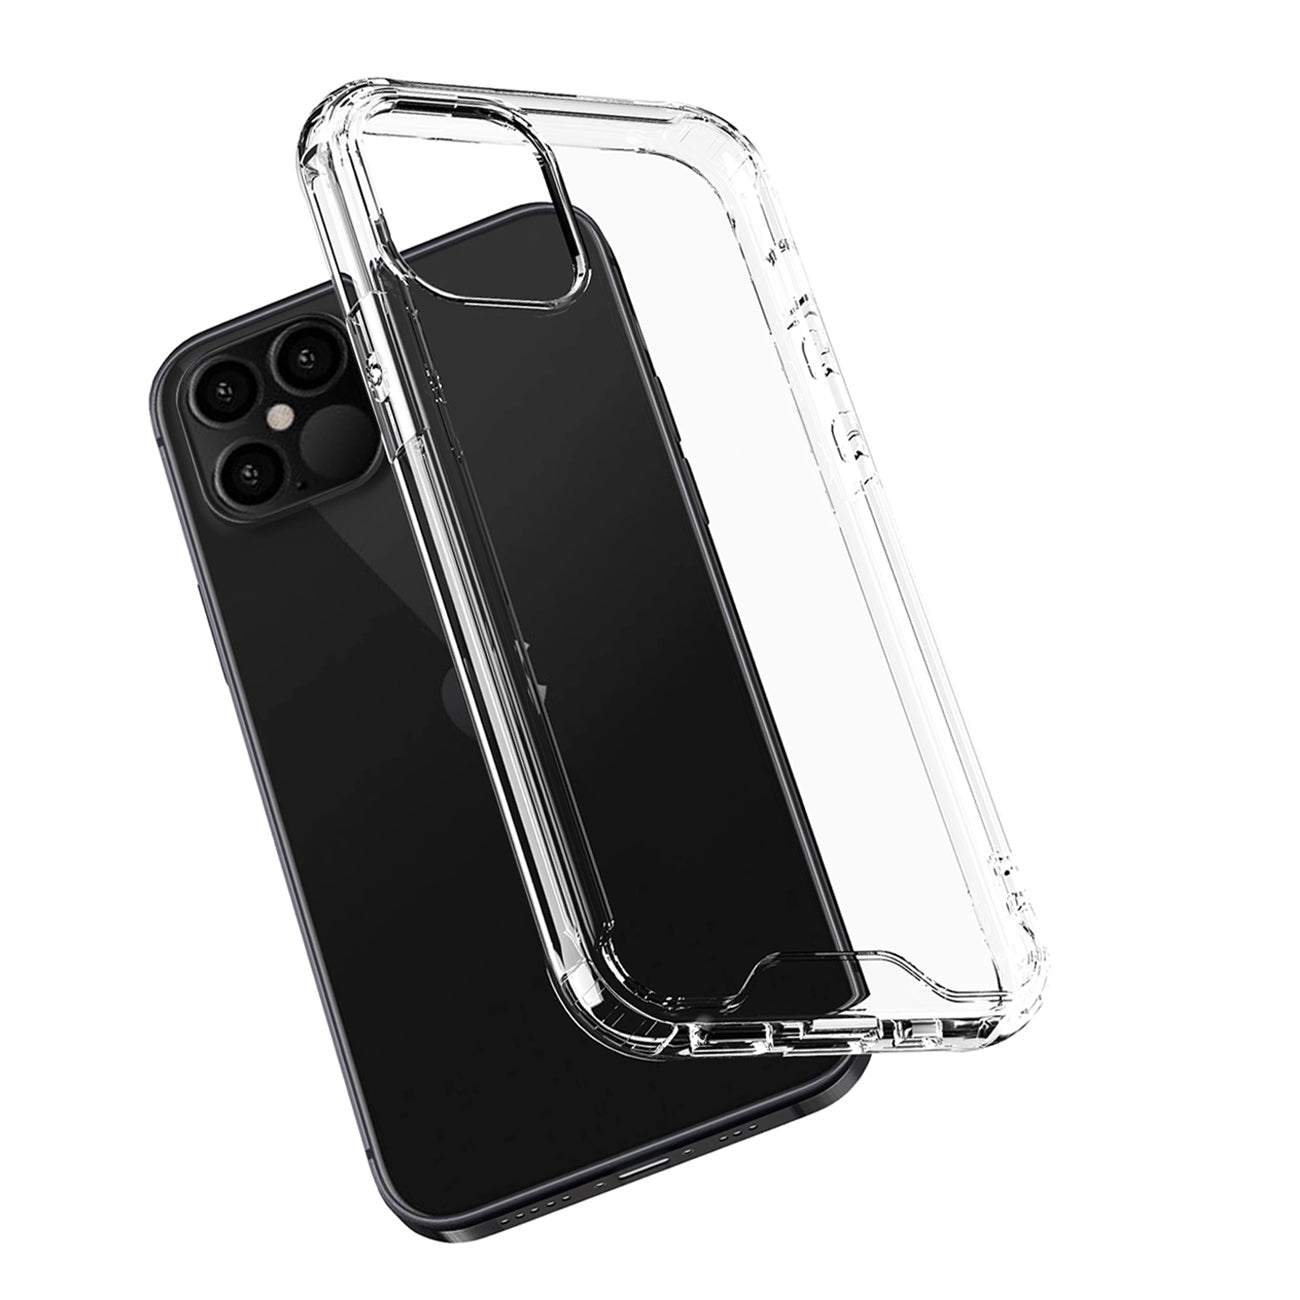 Case Bumper For iPhone 12 Pro Max Clear